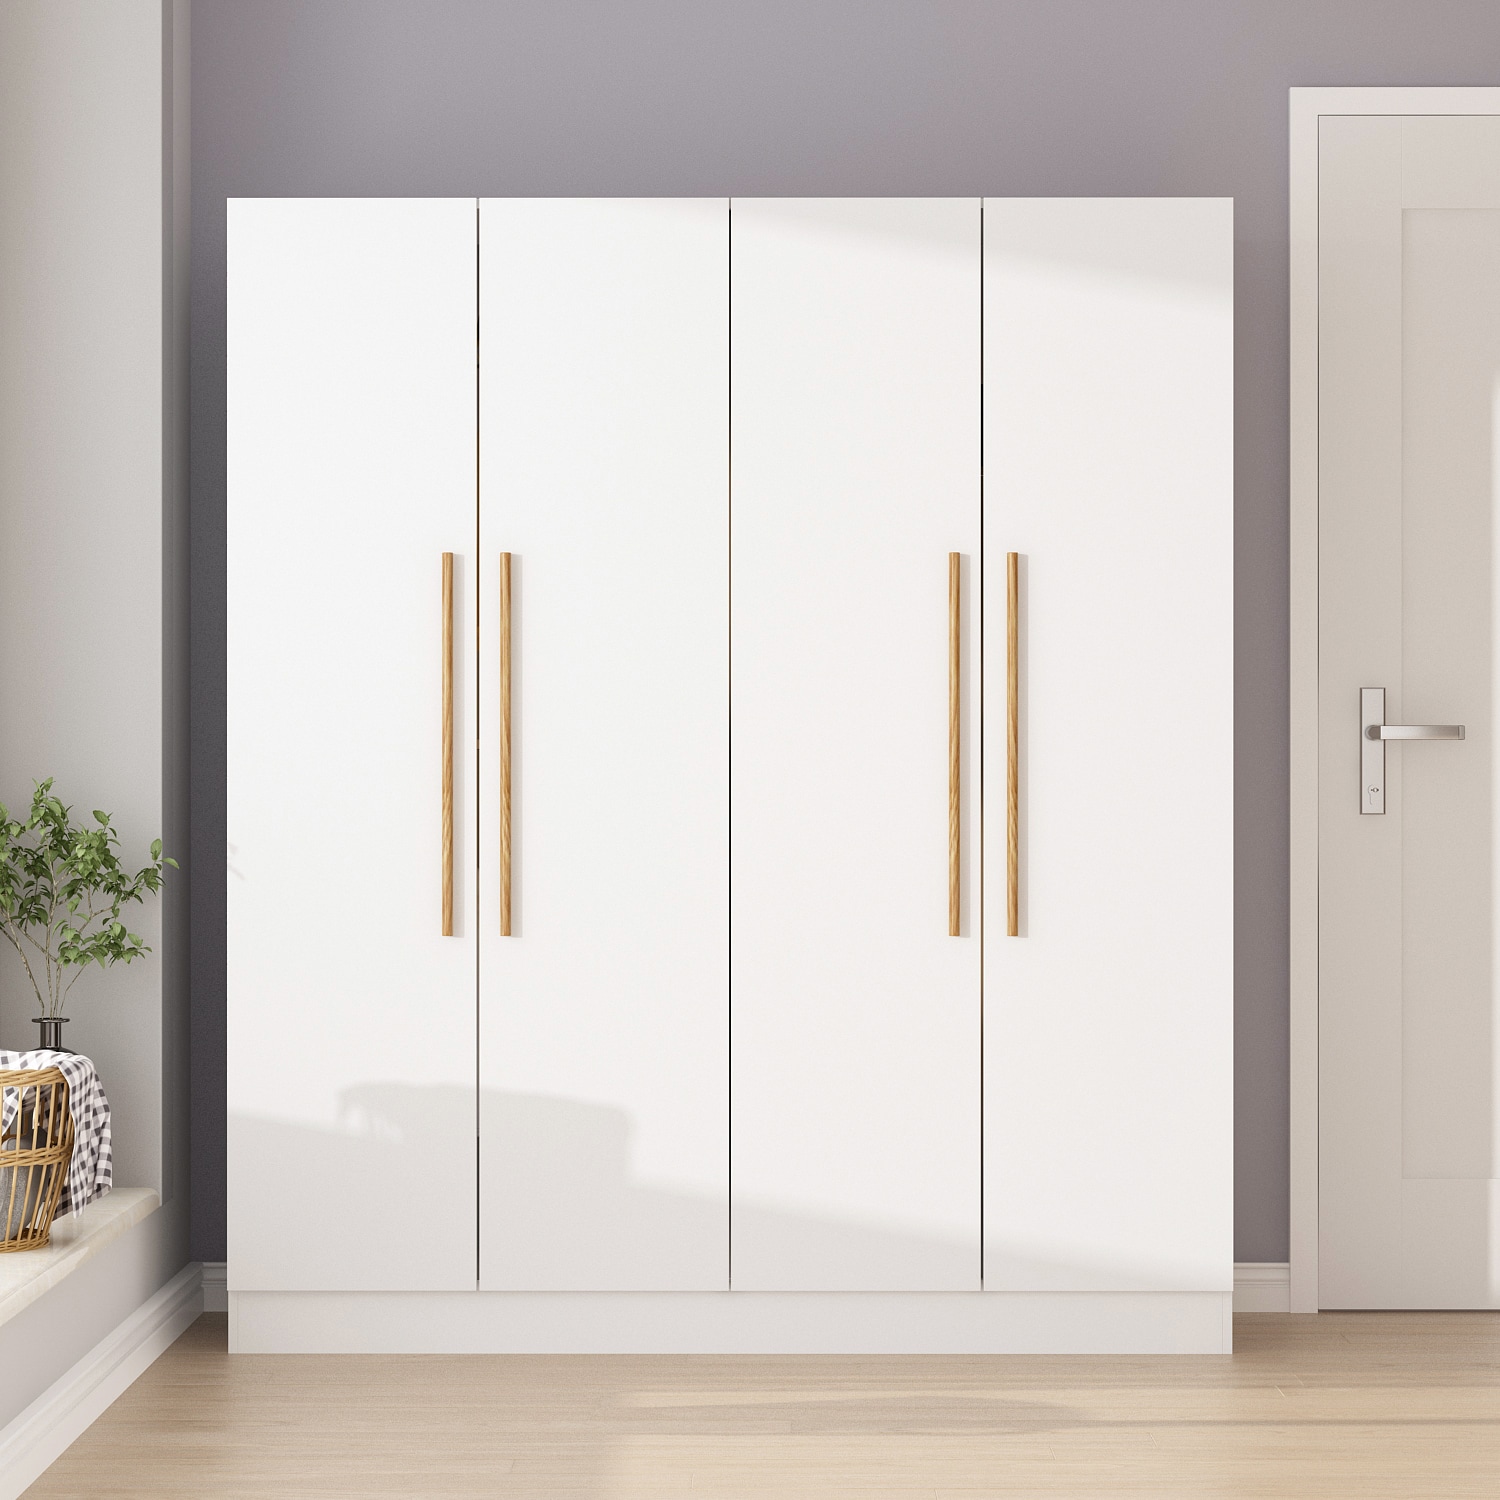 FUFU&GAGA Contemporary 3-Door Wardrobe Closet with 4 Drawers, Metal Slide  Rails, and Gold Handles - White Finish in the Armoires department at